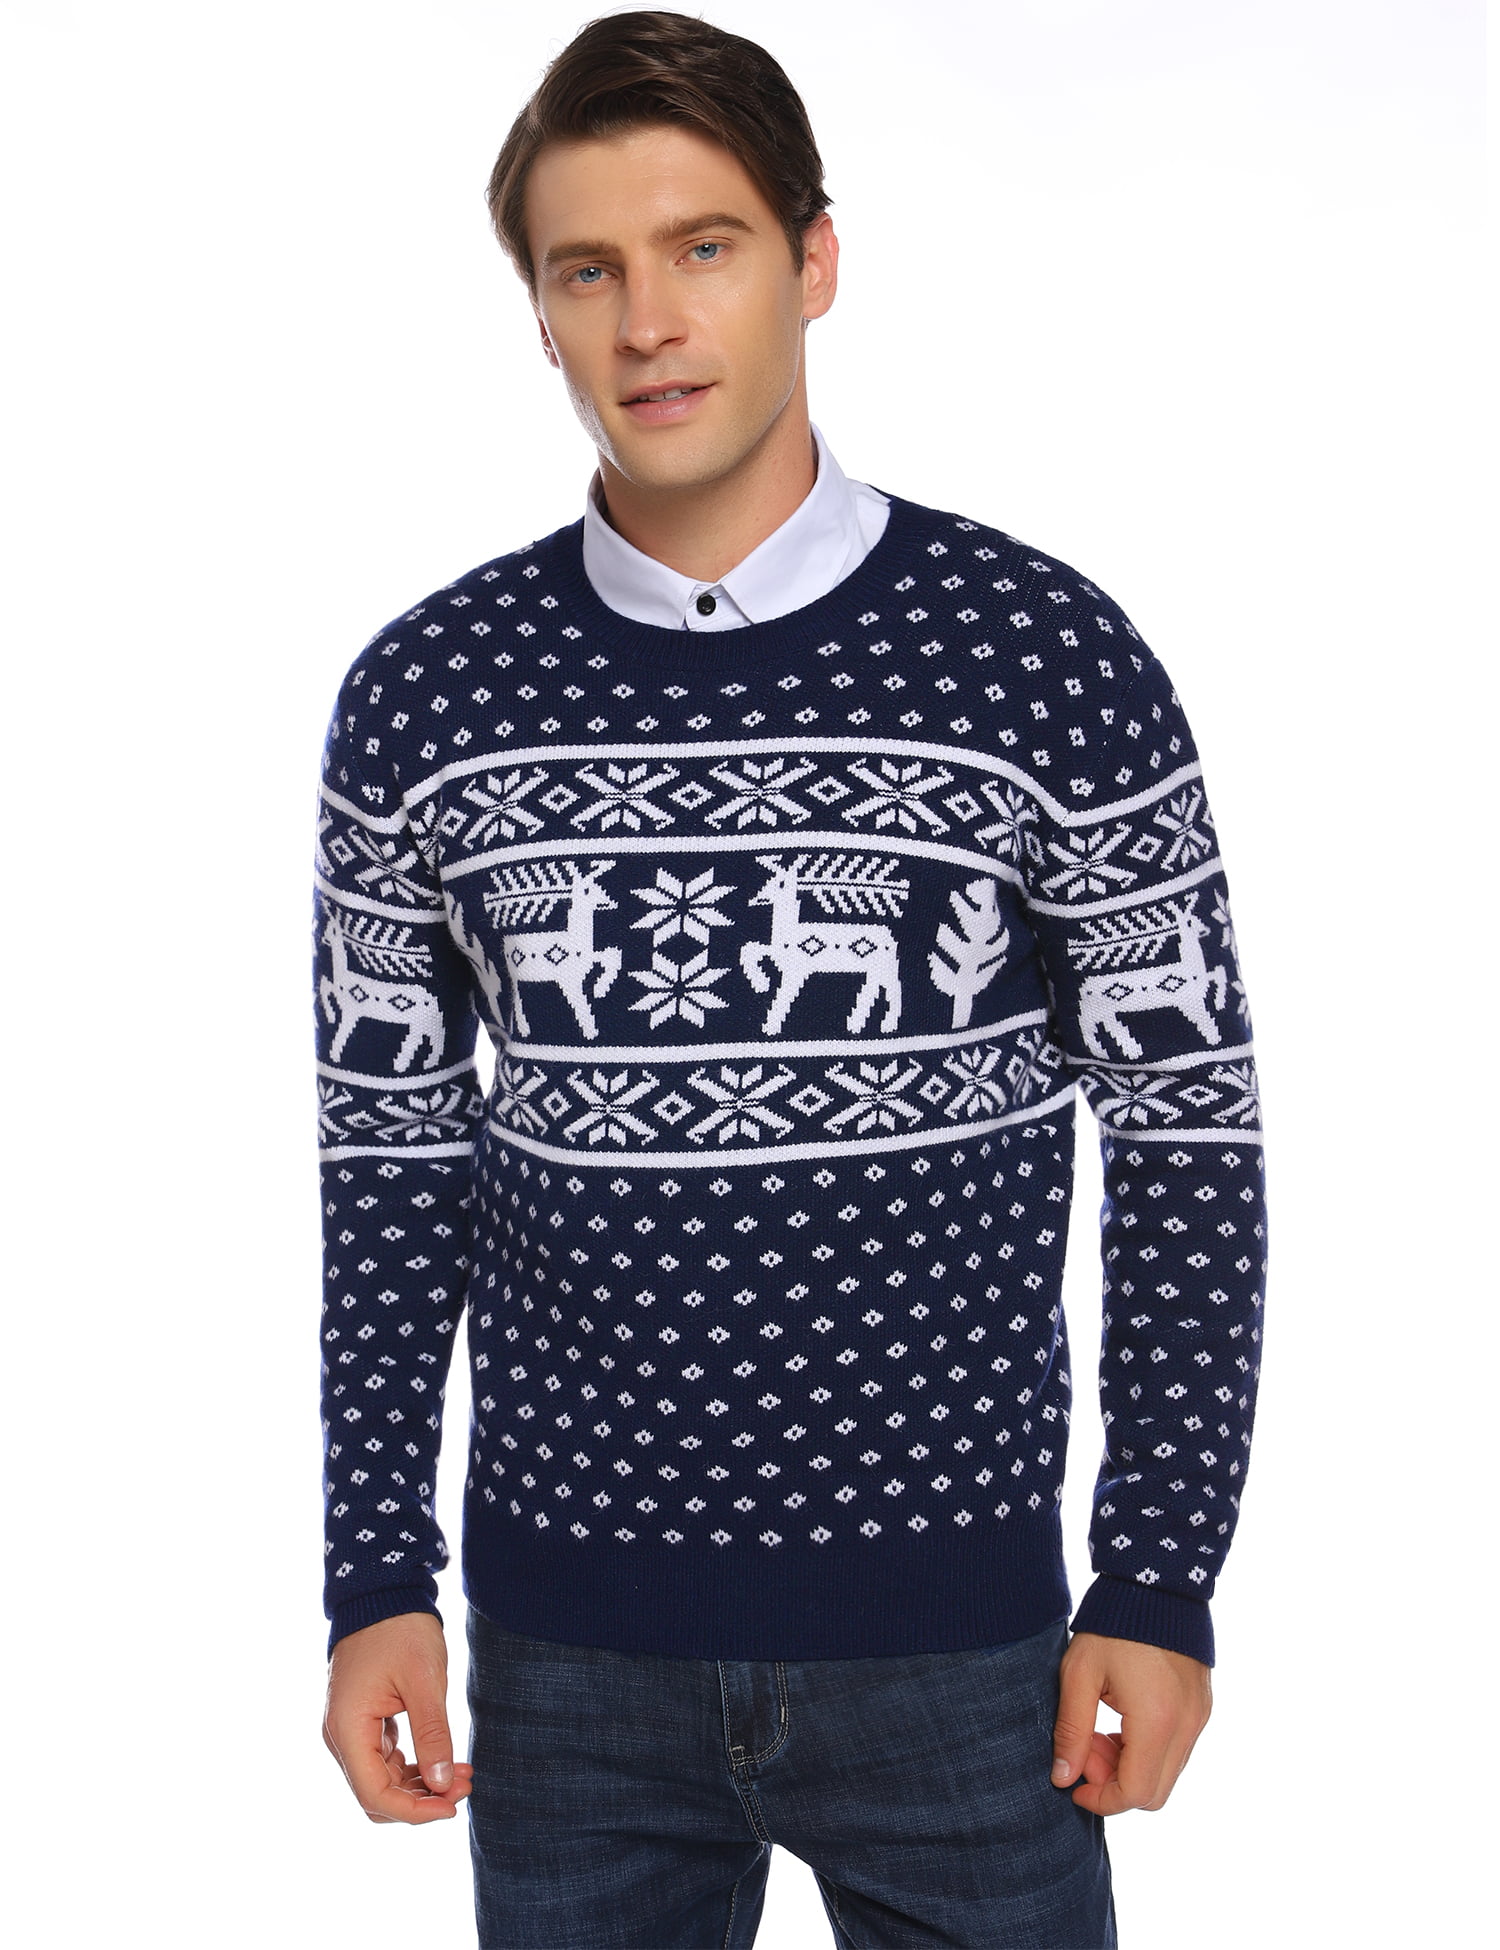 Abollria Family Christmas Jumper Reindeer Long Sleeve Chunky Knitted Ribbed Sweater Jumpers Knitwear Top